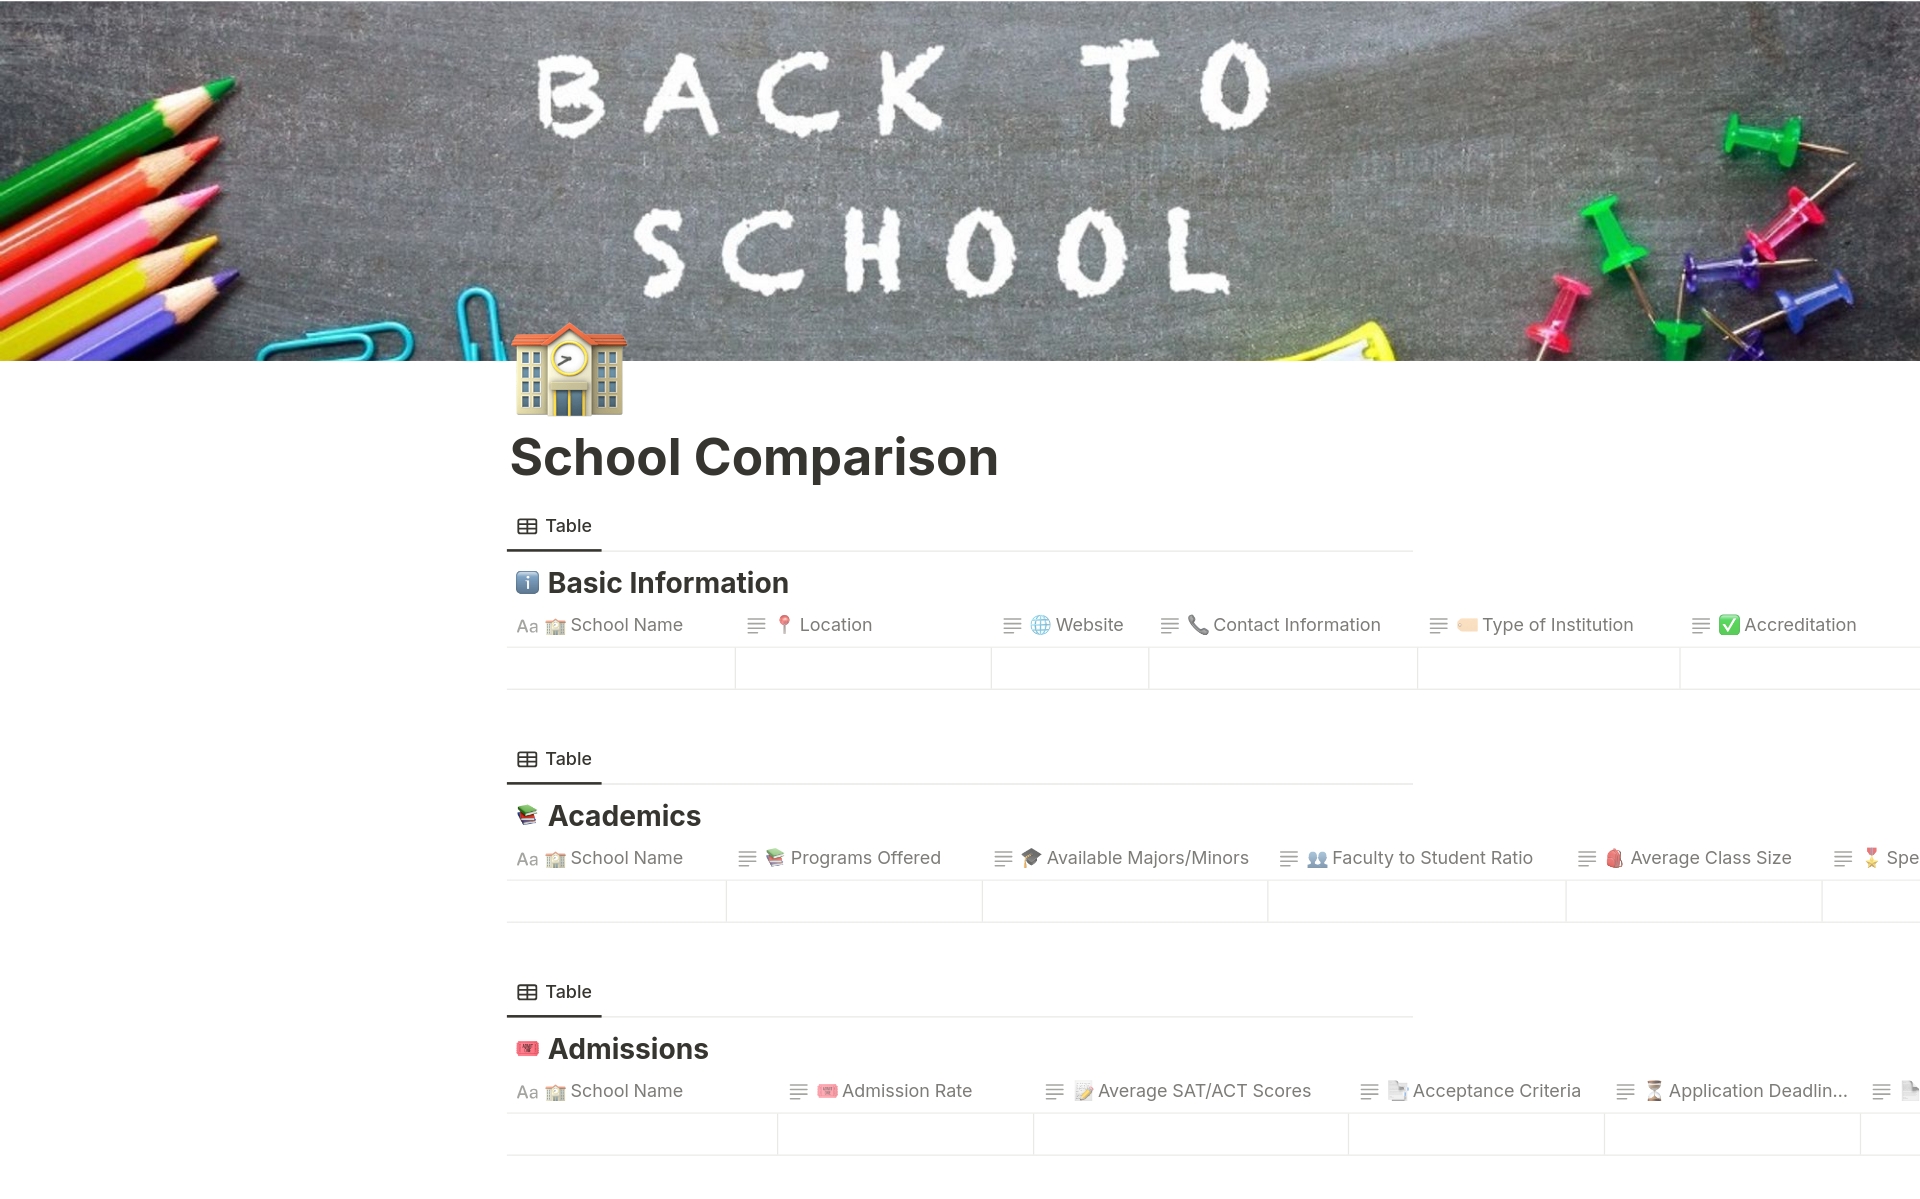 Compare schools efficiently with this Notion template. Organize info on academics, admissions, campus life, facilities, costs, alumni services, and more to make informed decisions. Streamline your school evaluation process with ease.